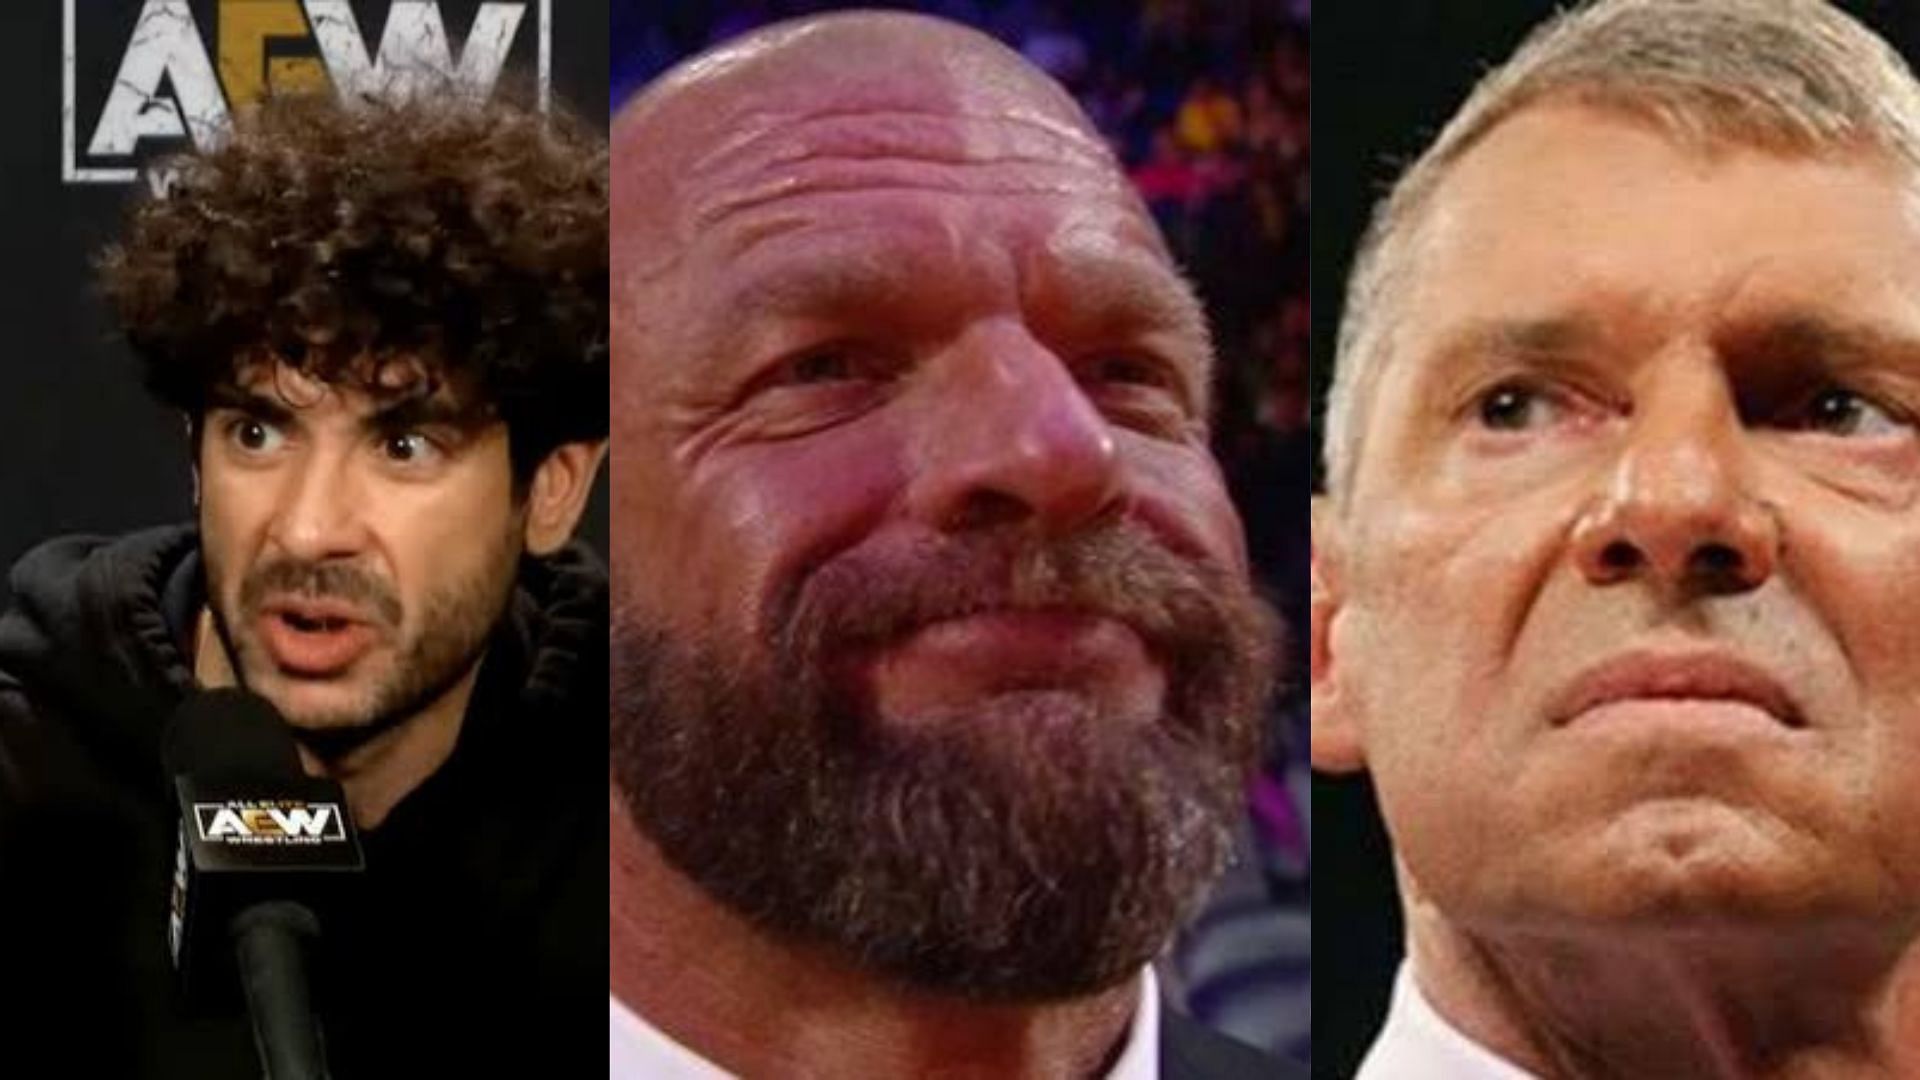 HHH has made some bold changes in WWE of late.